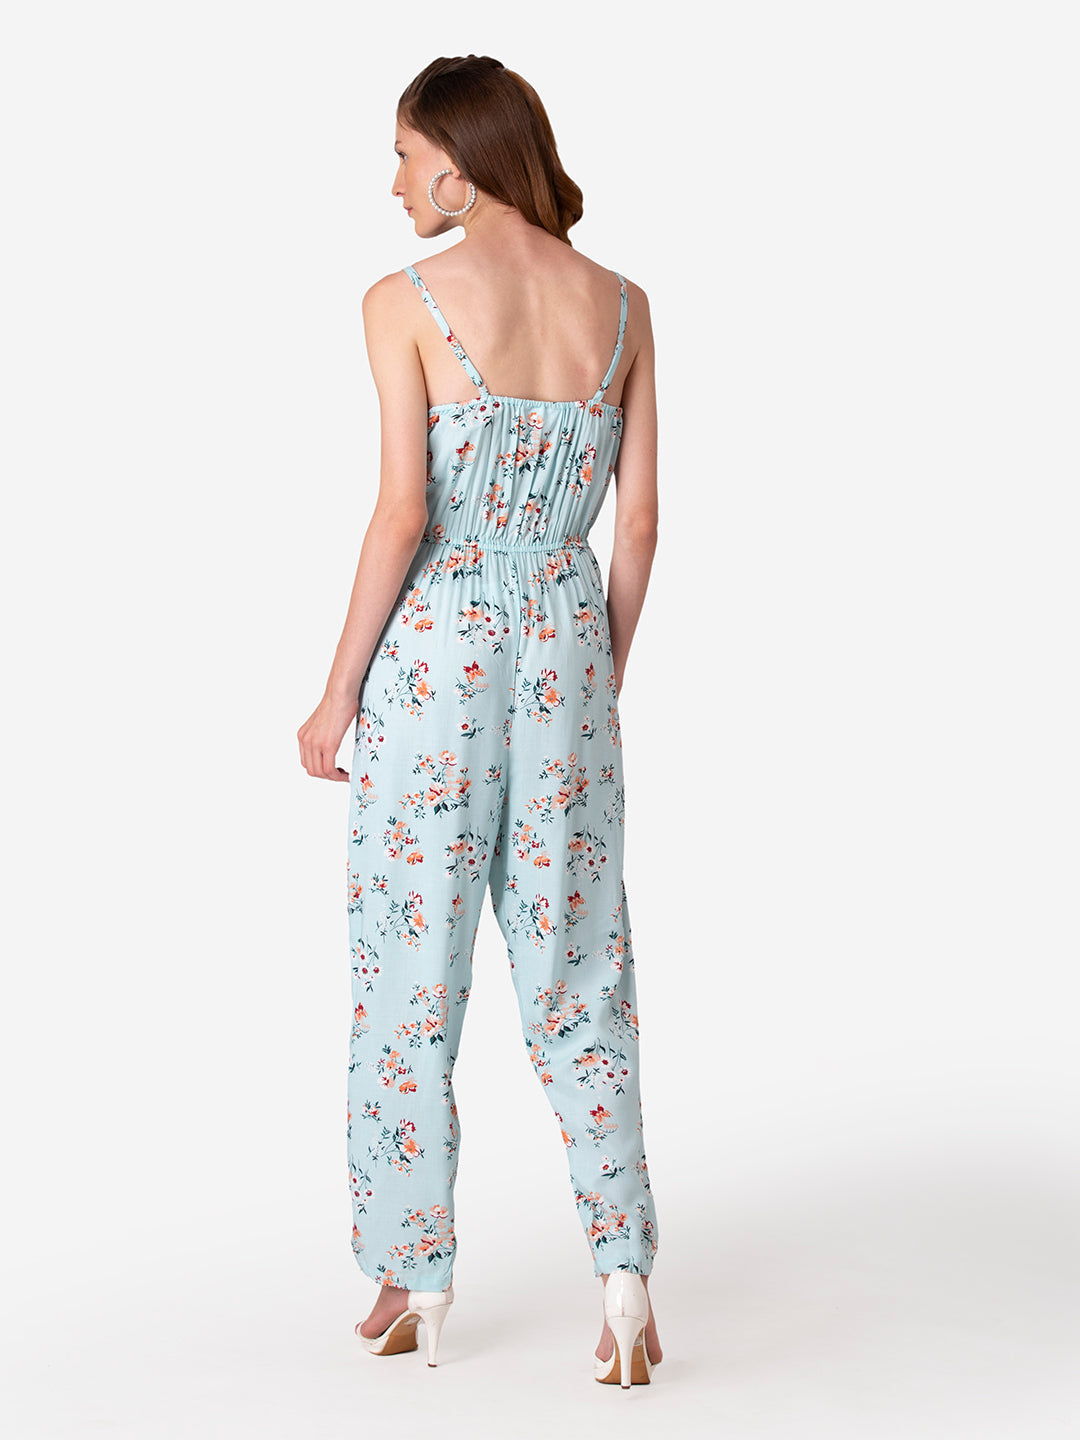 Buy Women Blue And White Floral Print Jumpsuit With Belt - Date Night Dress  Online India - FabAlley